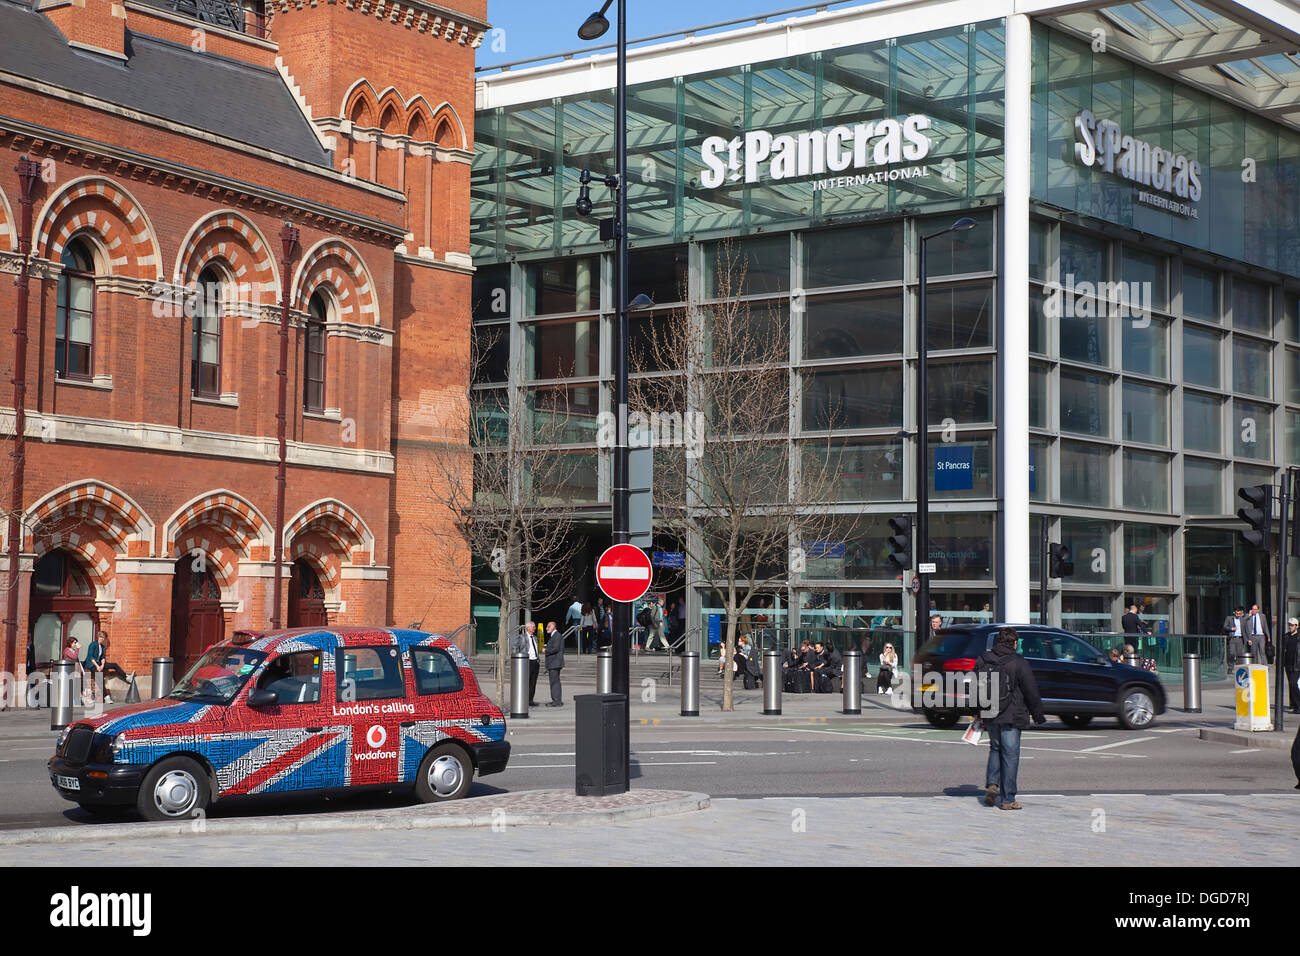 England, London, Taxi cabs outside the entrance to St Pancras Railway Station. Stock Photo